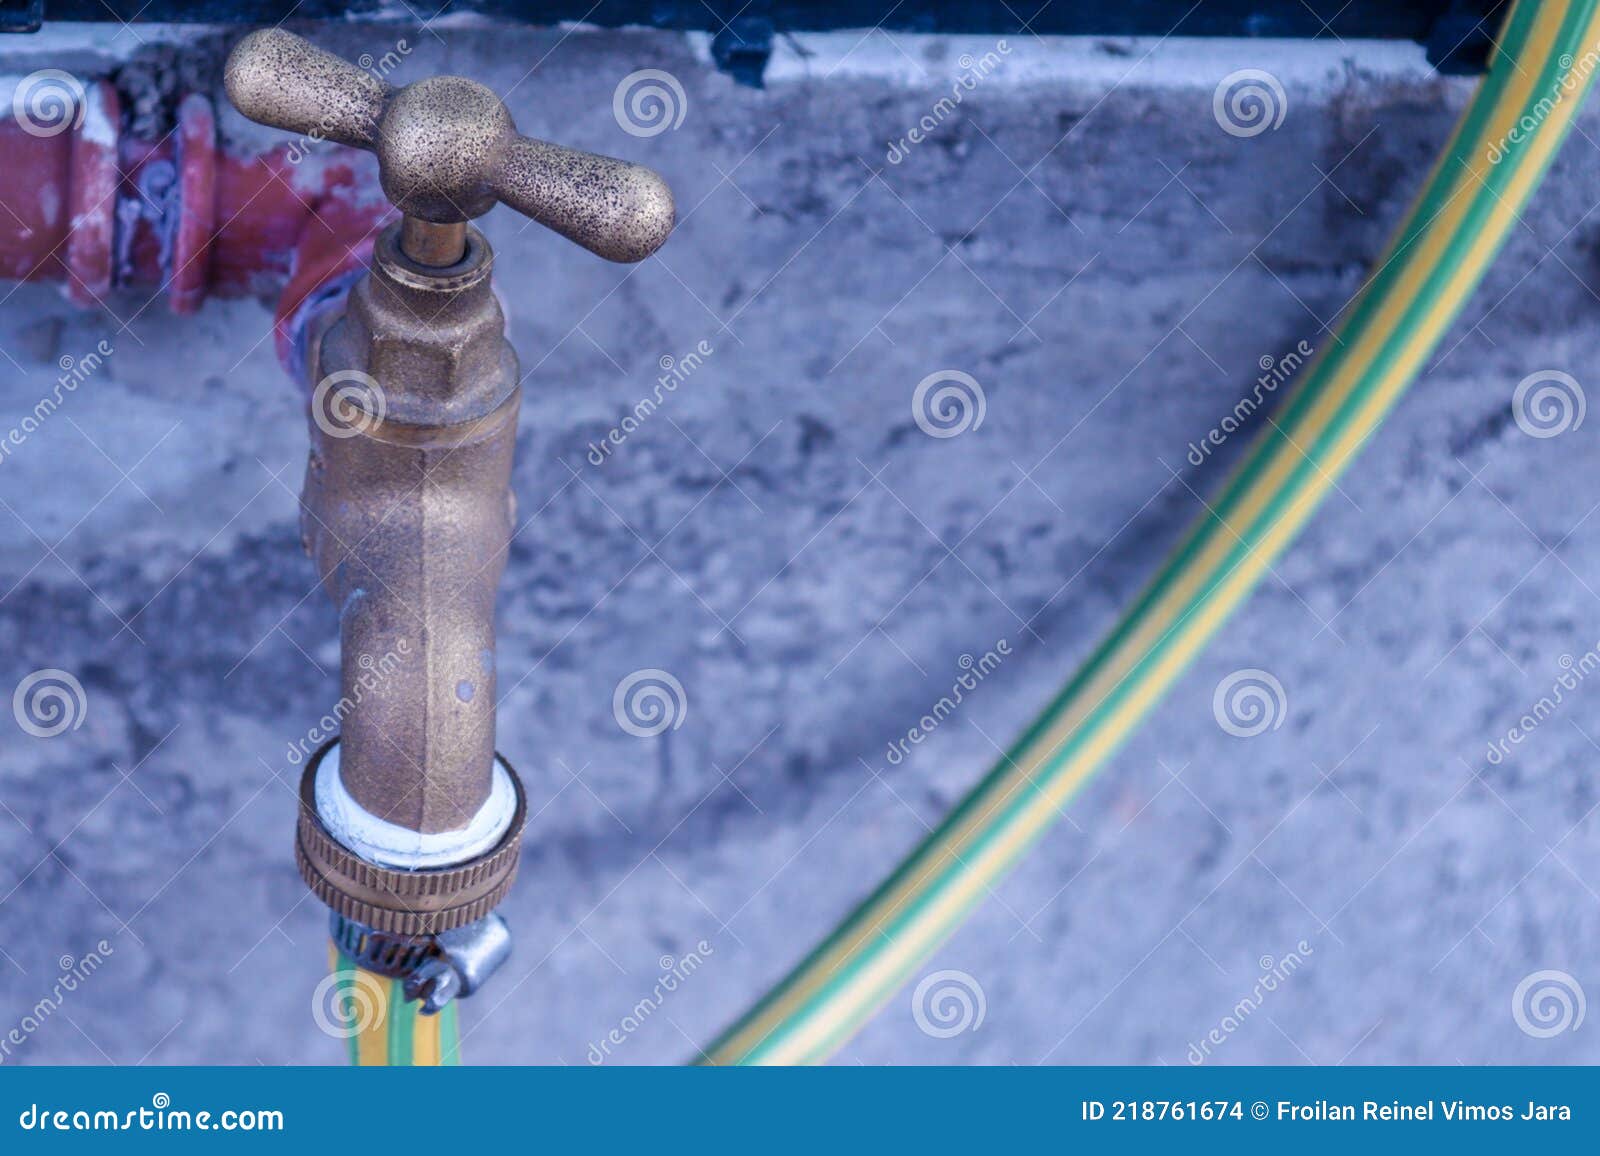 water tap with hose connected for the garden